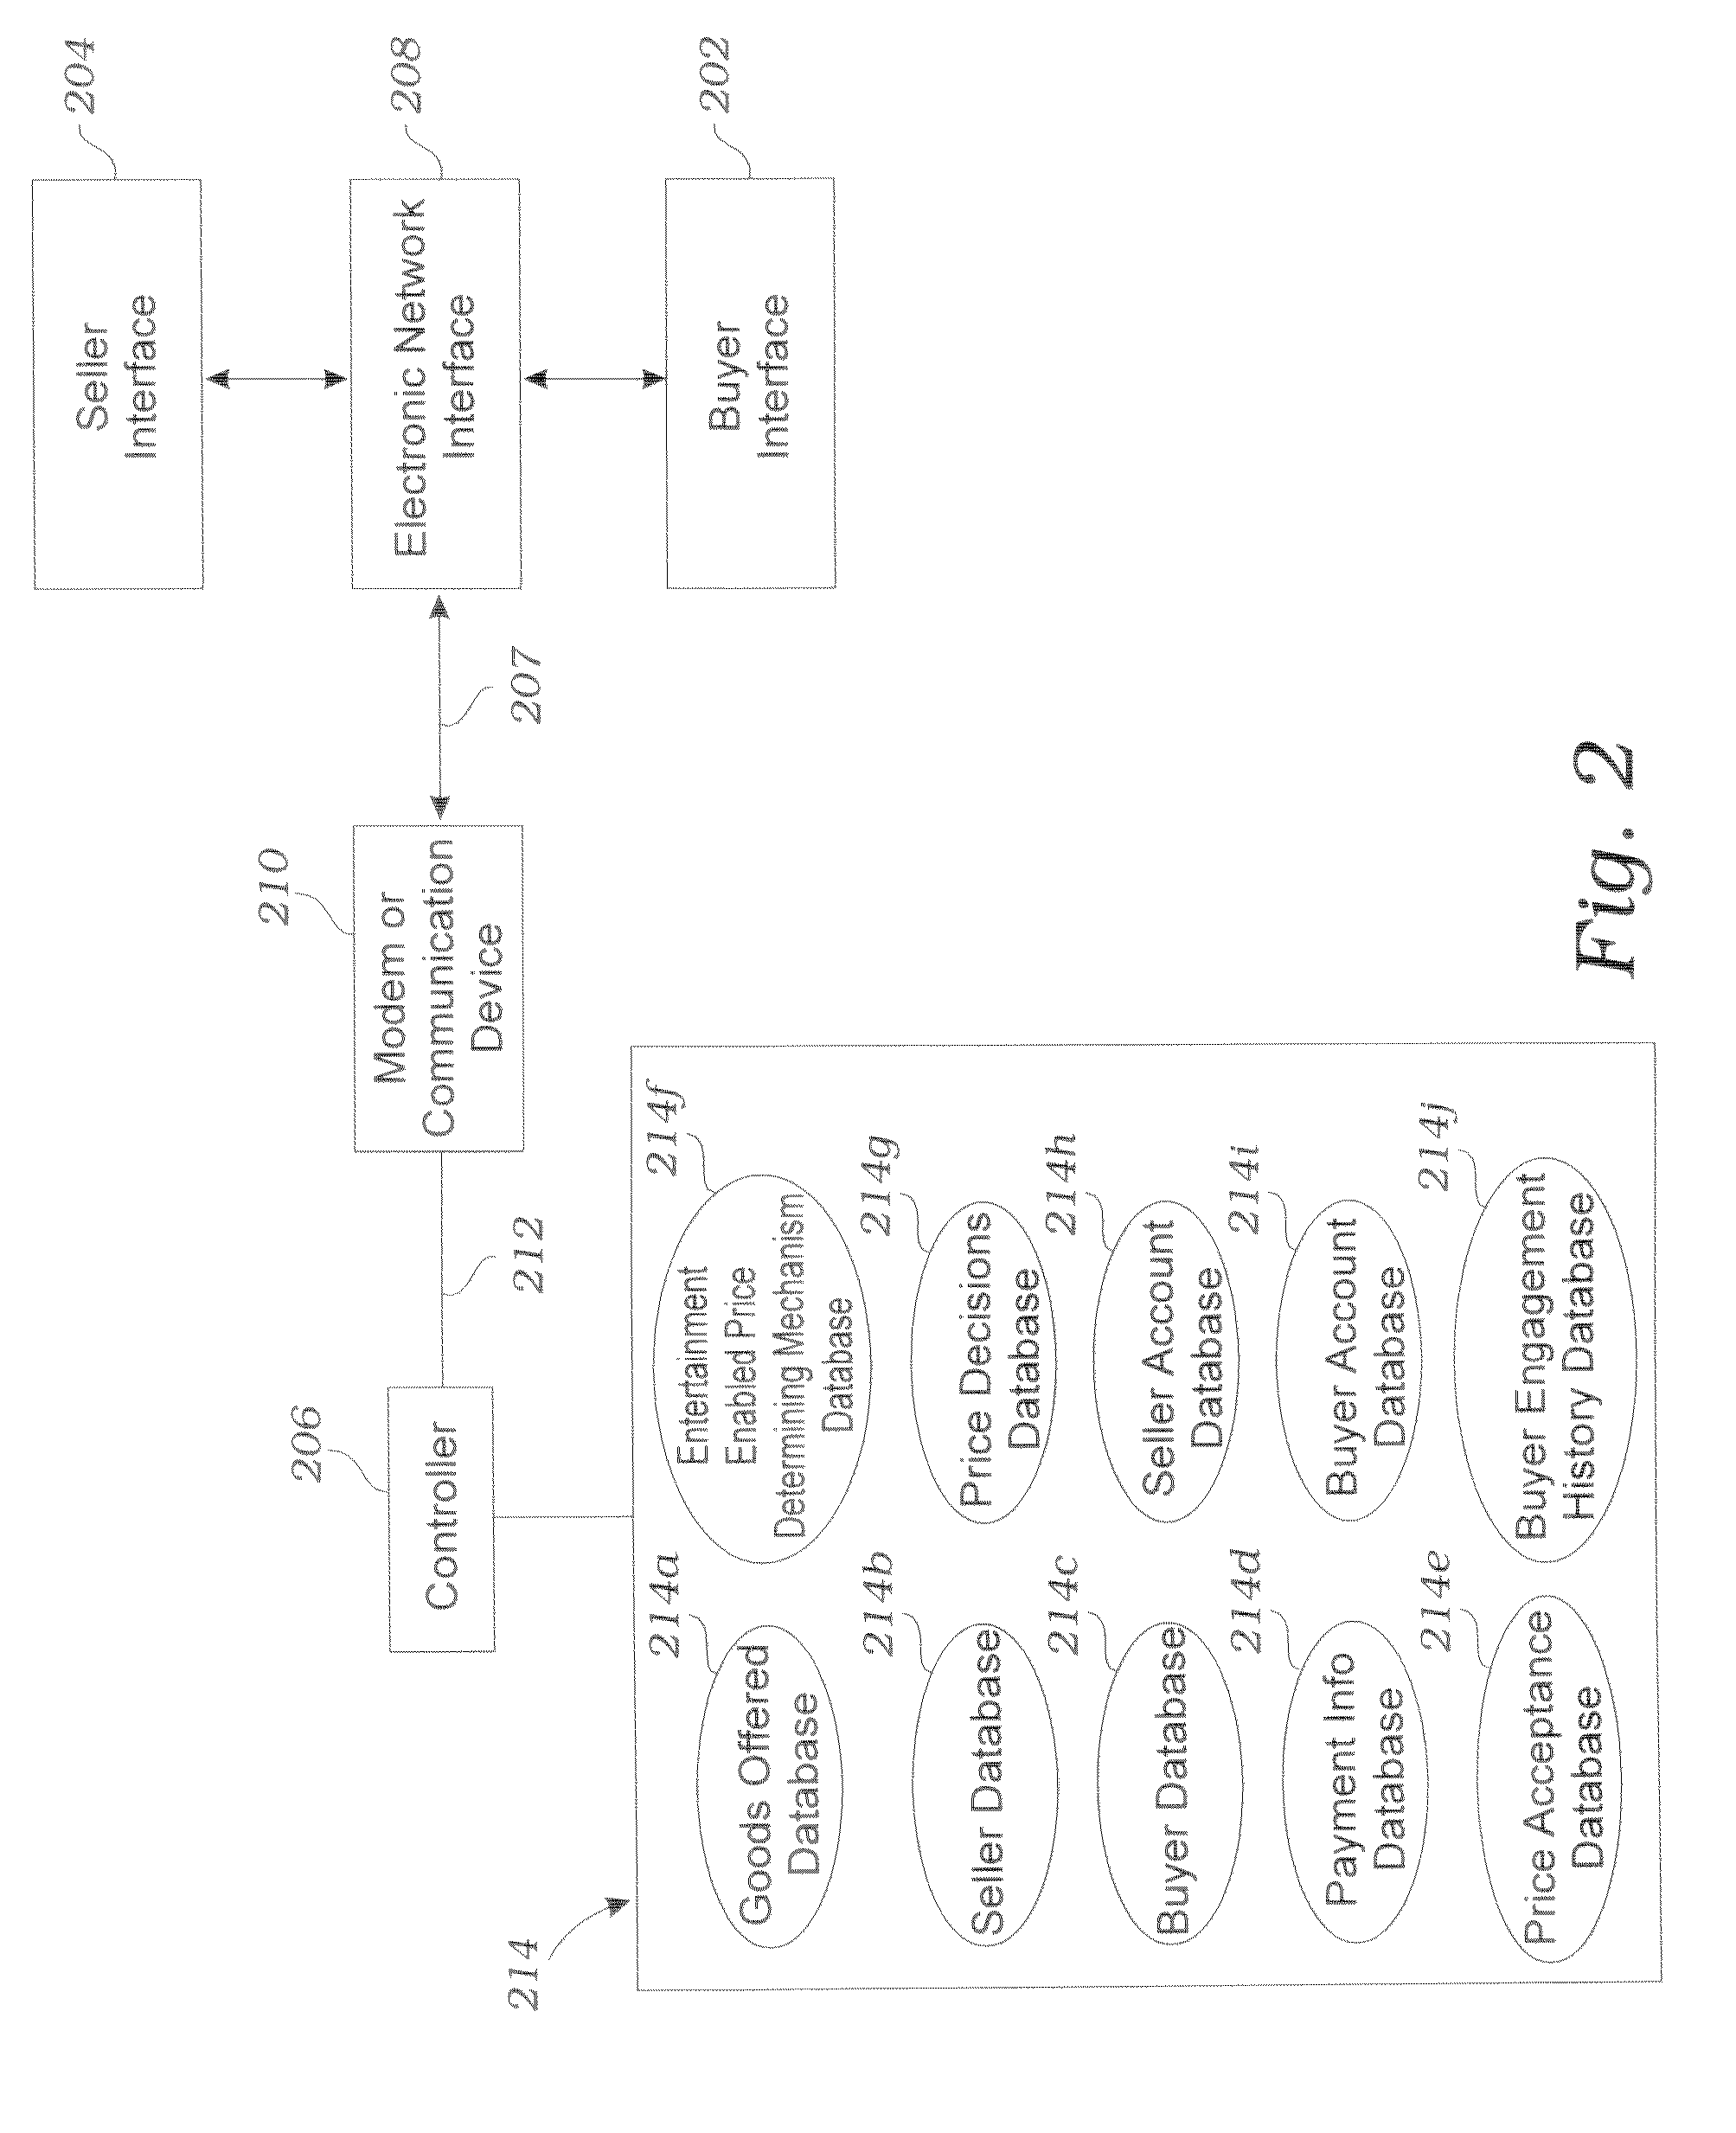 Systems and Methods For Transacting Business Over A Global Communications Network Such As The Internet